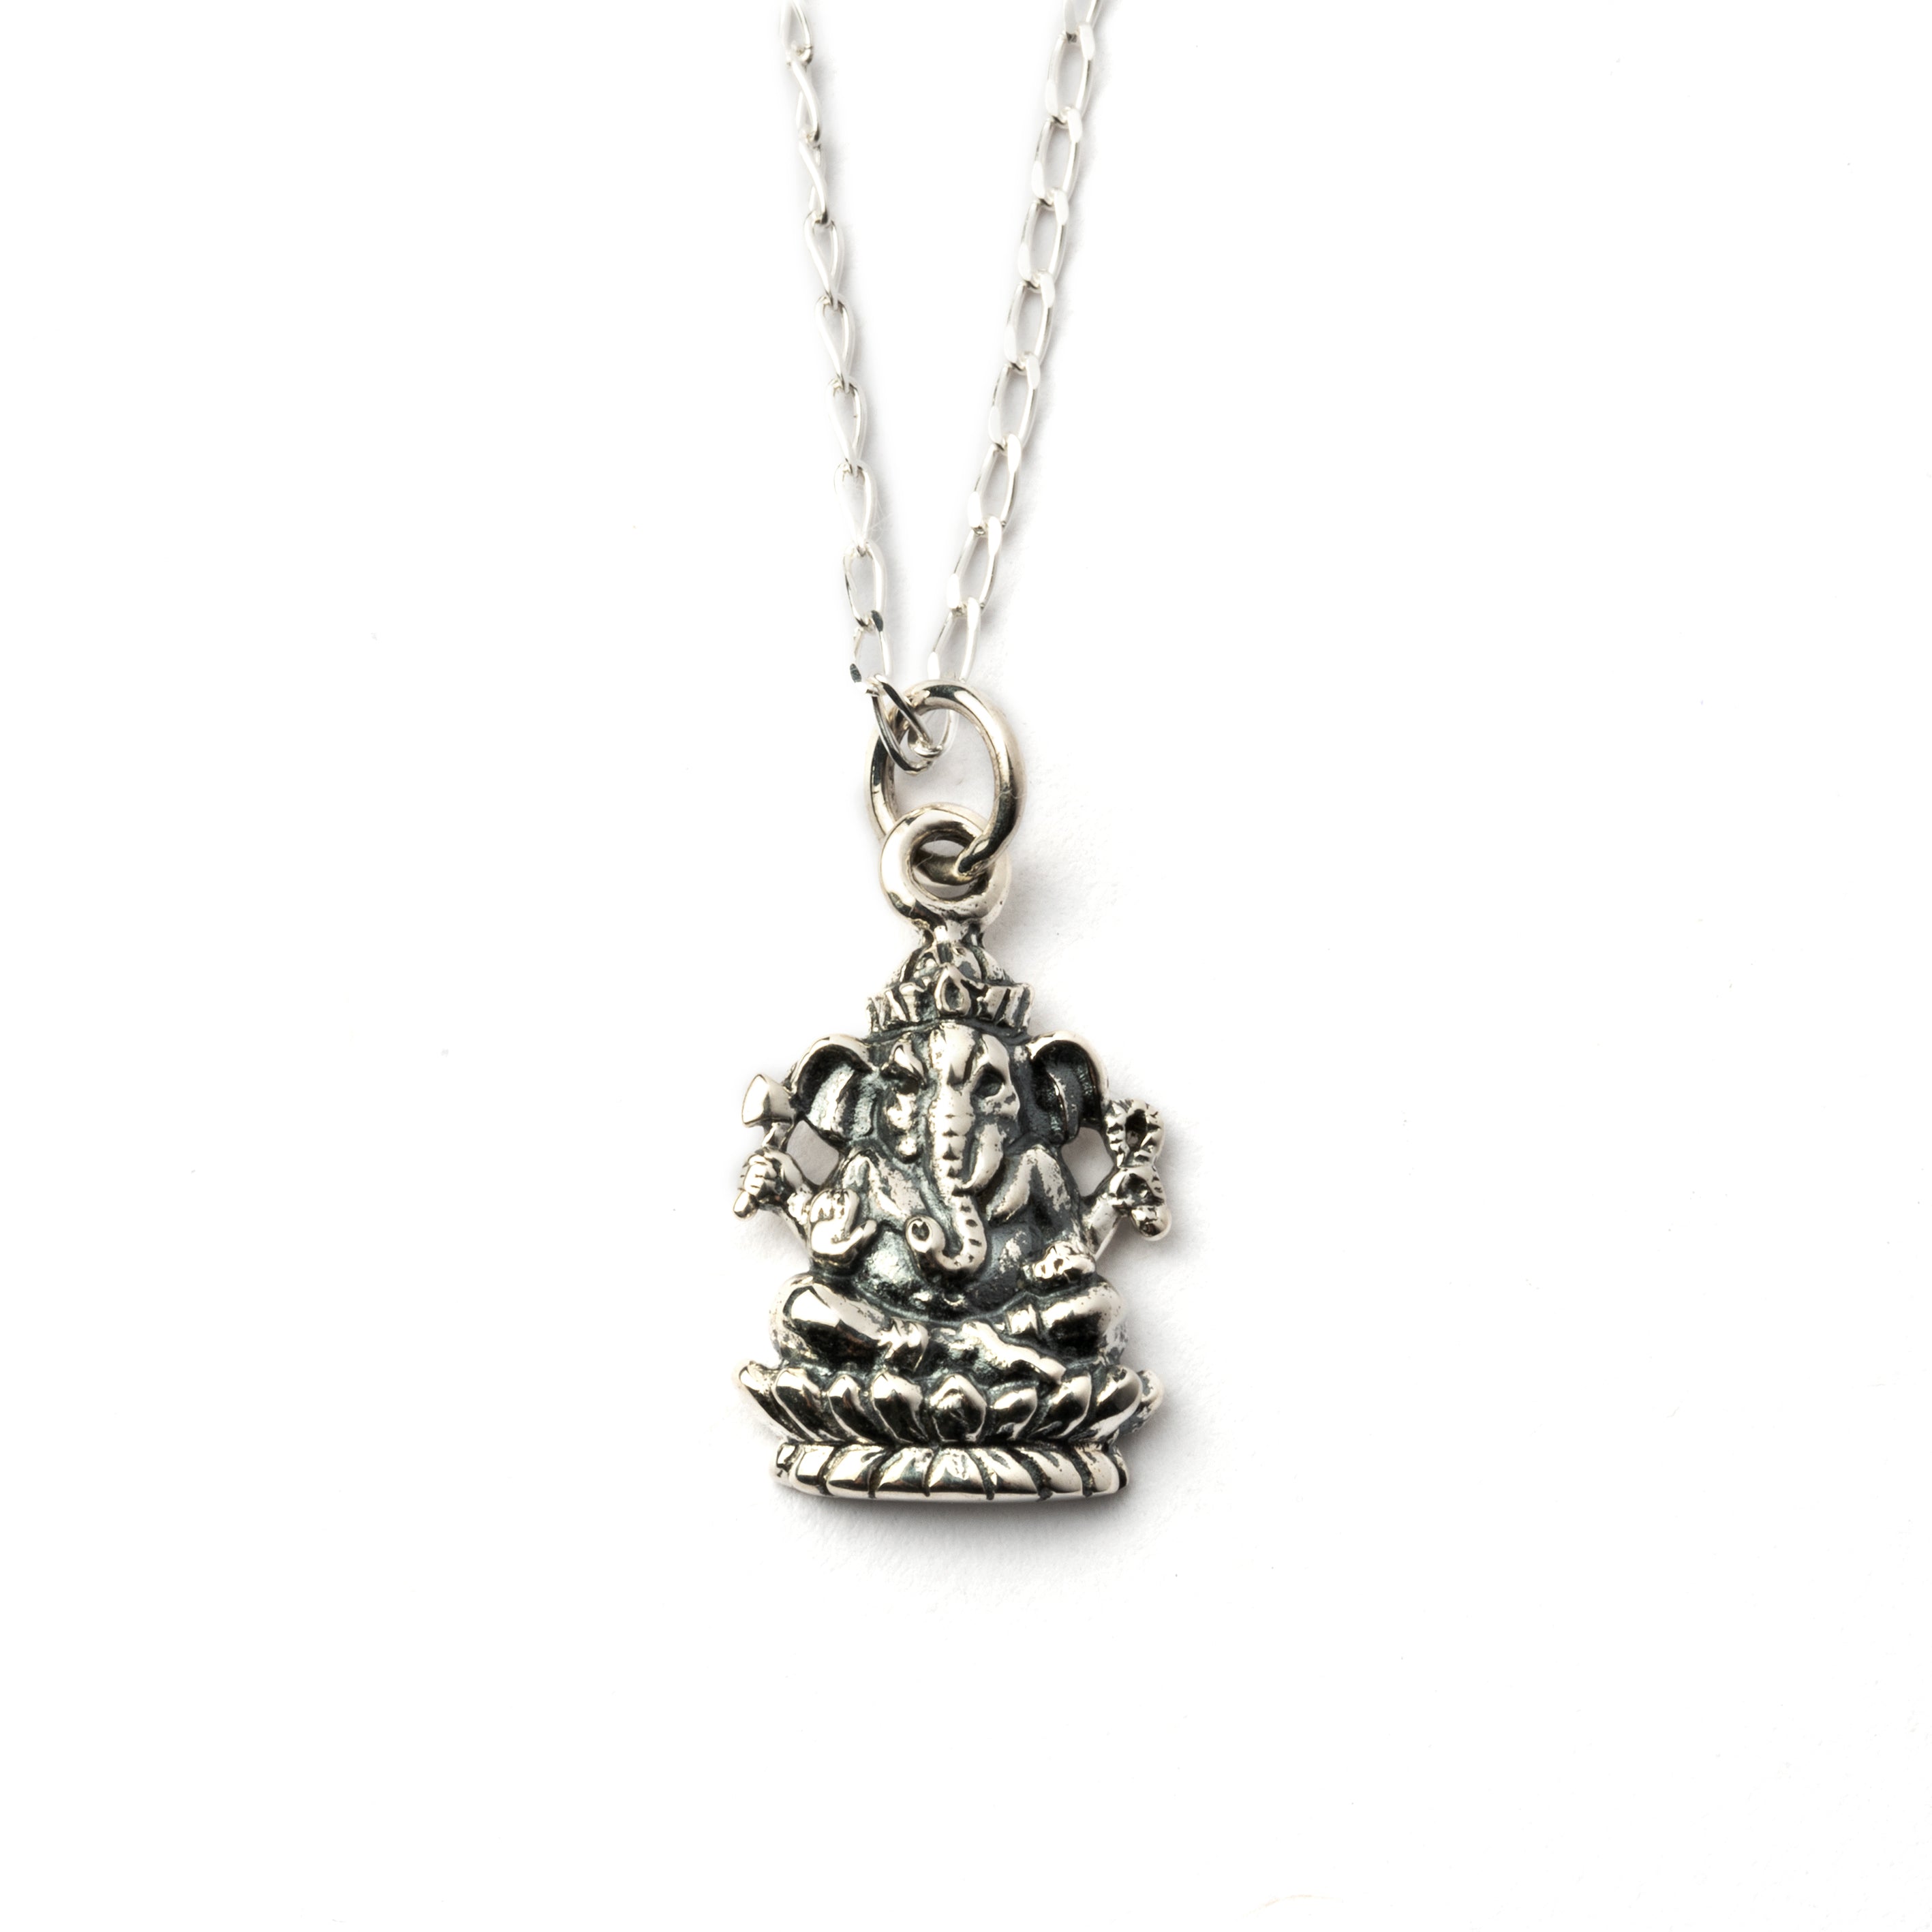 Ganesh Silver charm necklace frontal view